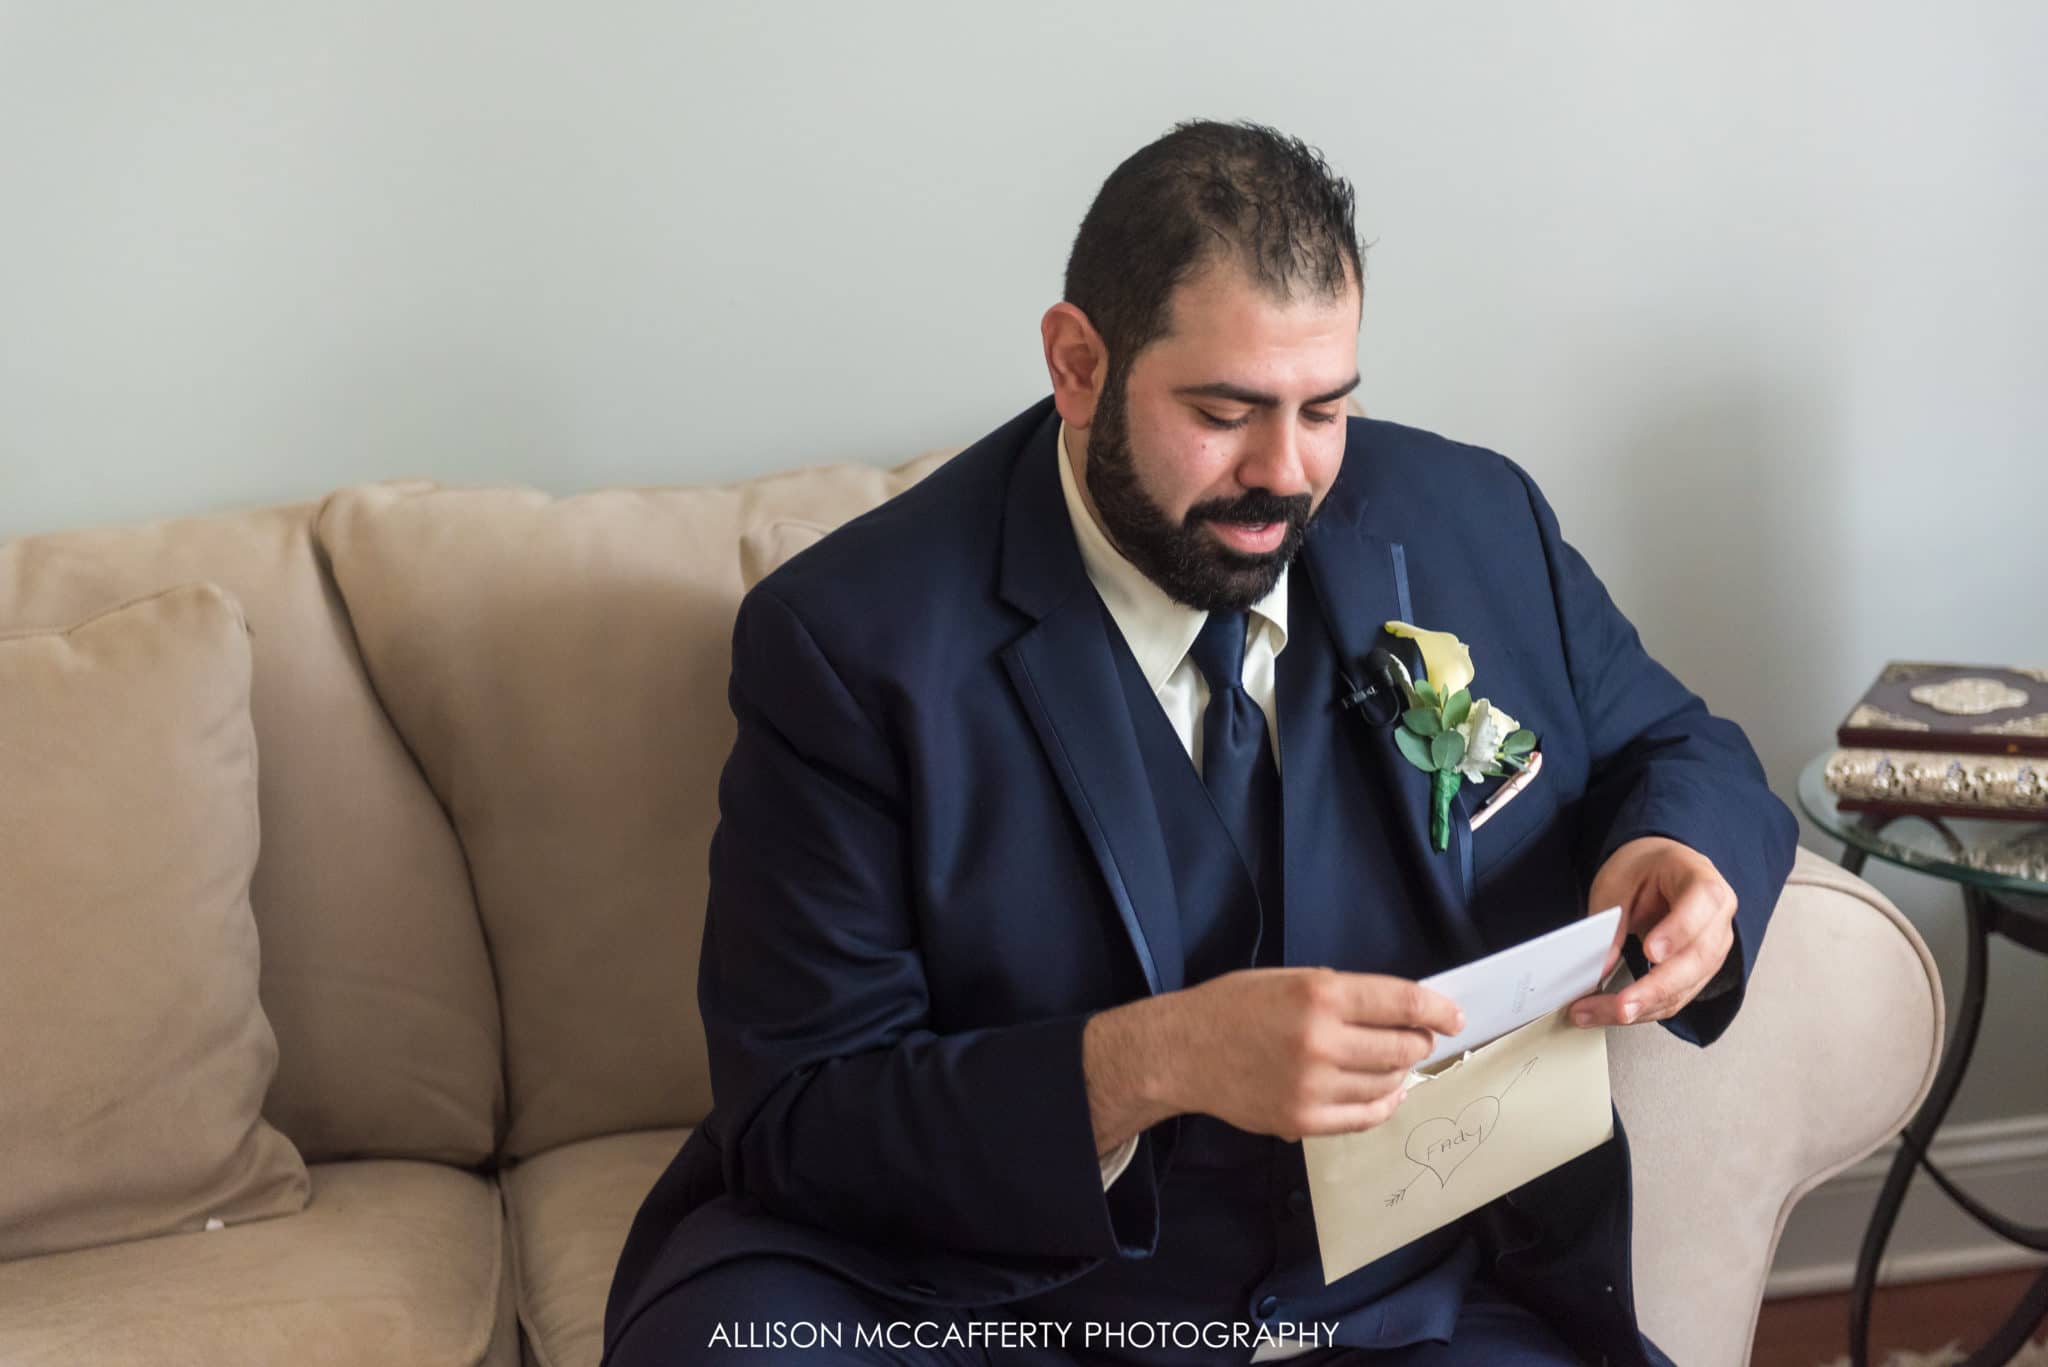 Groom reading a card from his bride to be